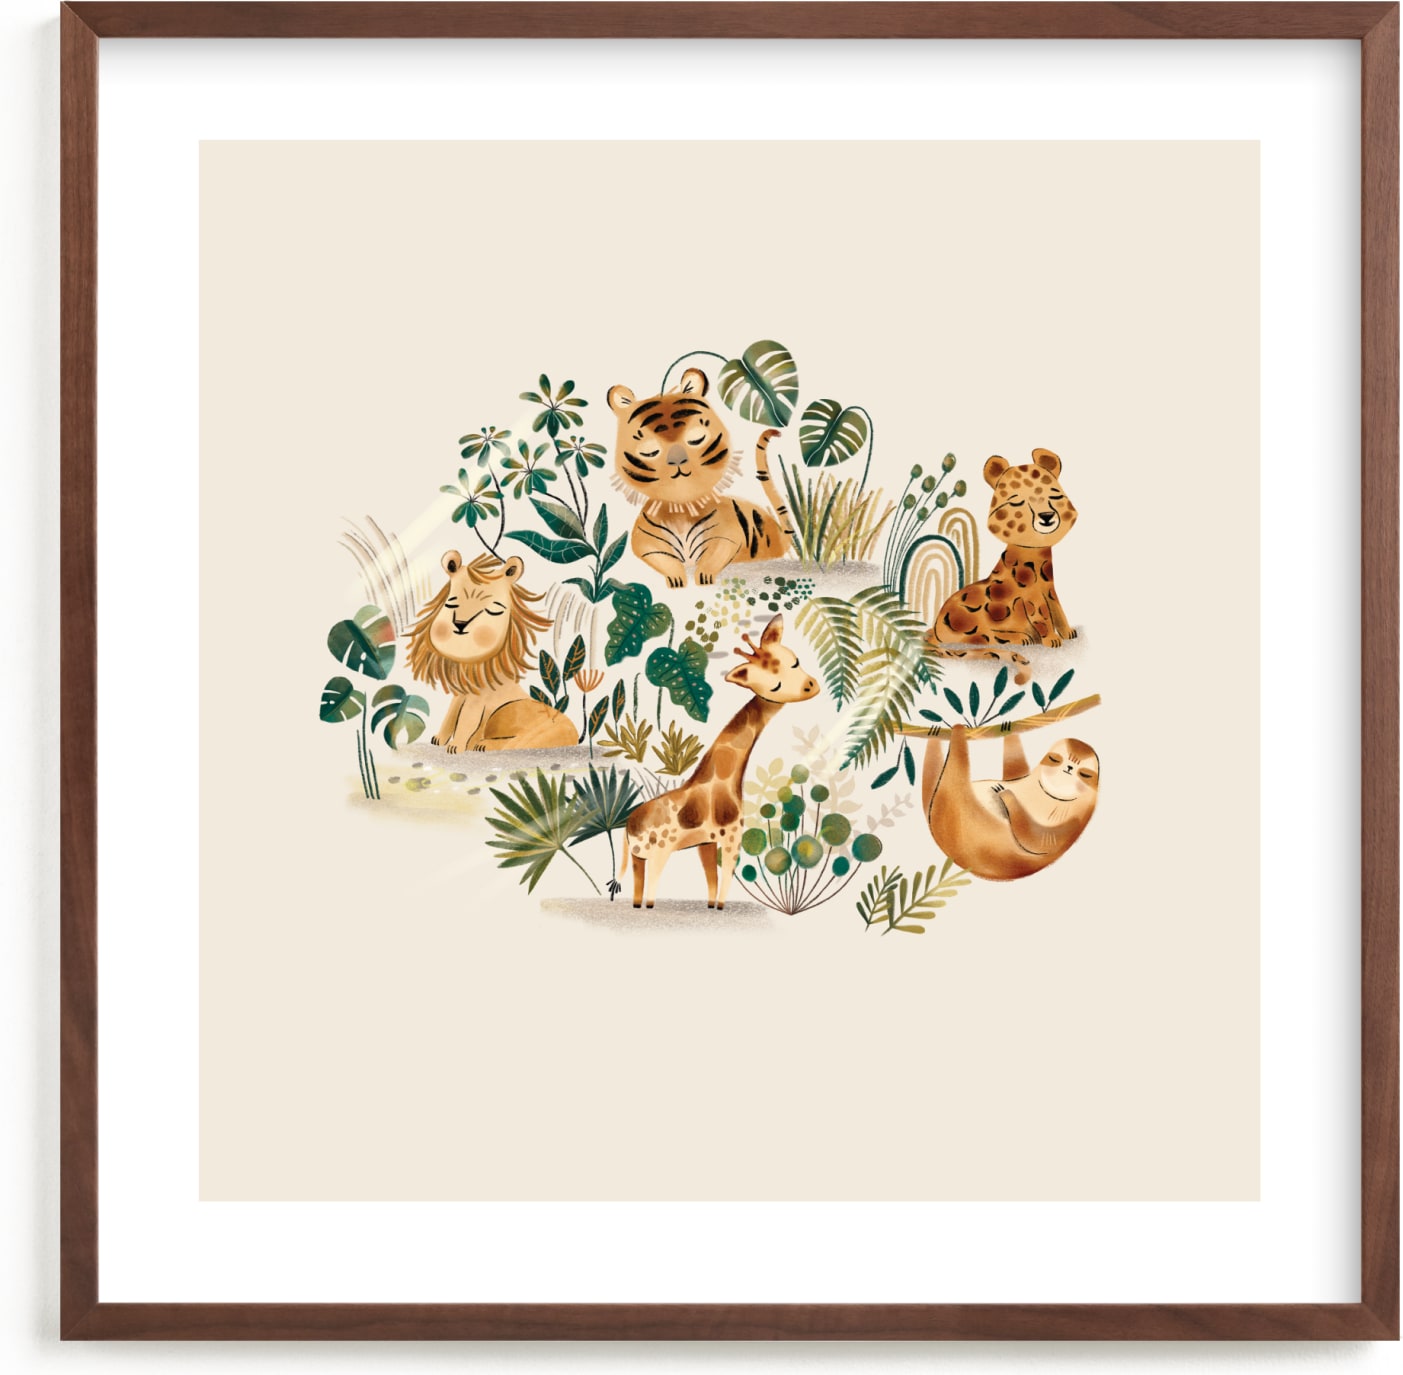 This is a brown nursery wall art by Vivian Yiwing called wild.